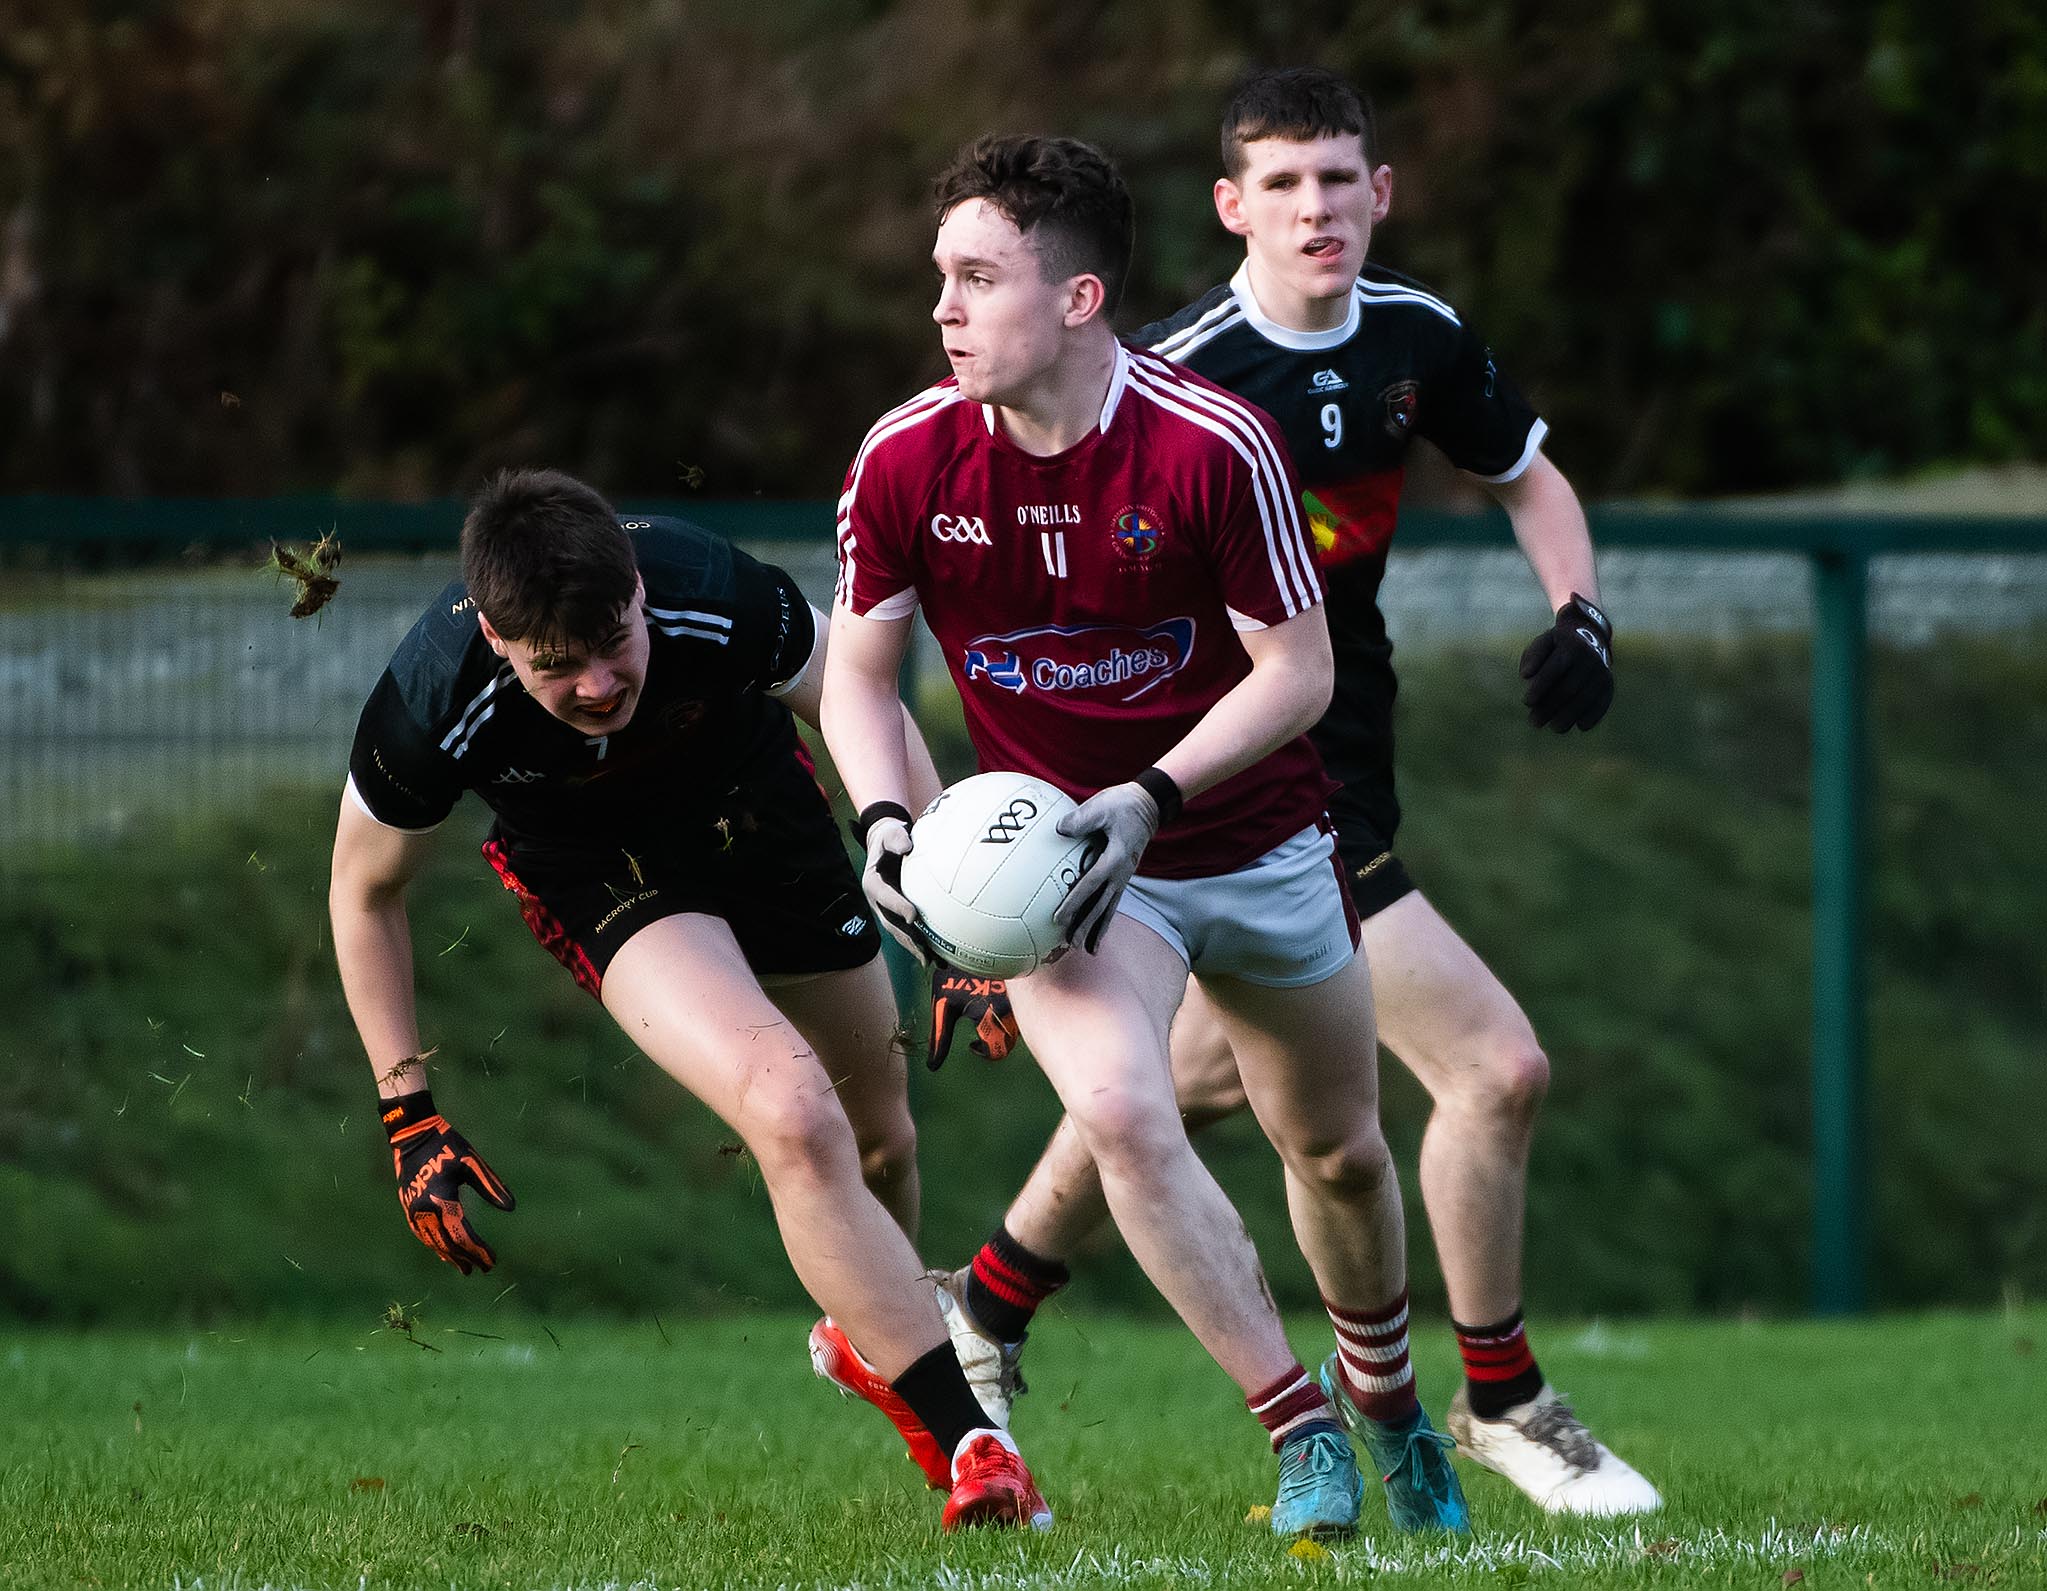 Omagh CBS to tackle St Colman’s in MacRory Cup last eight tie